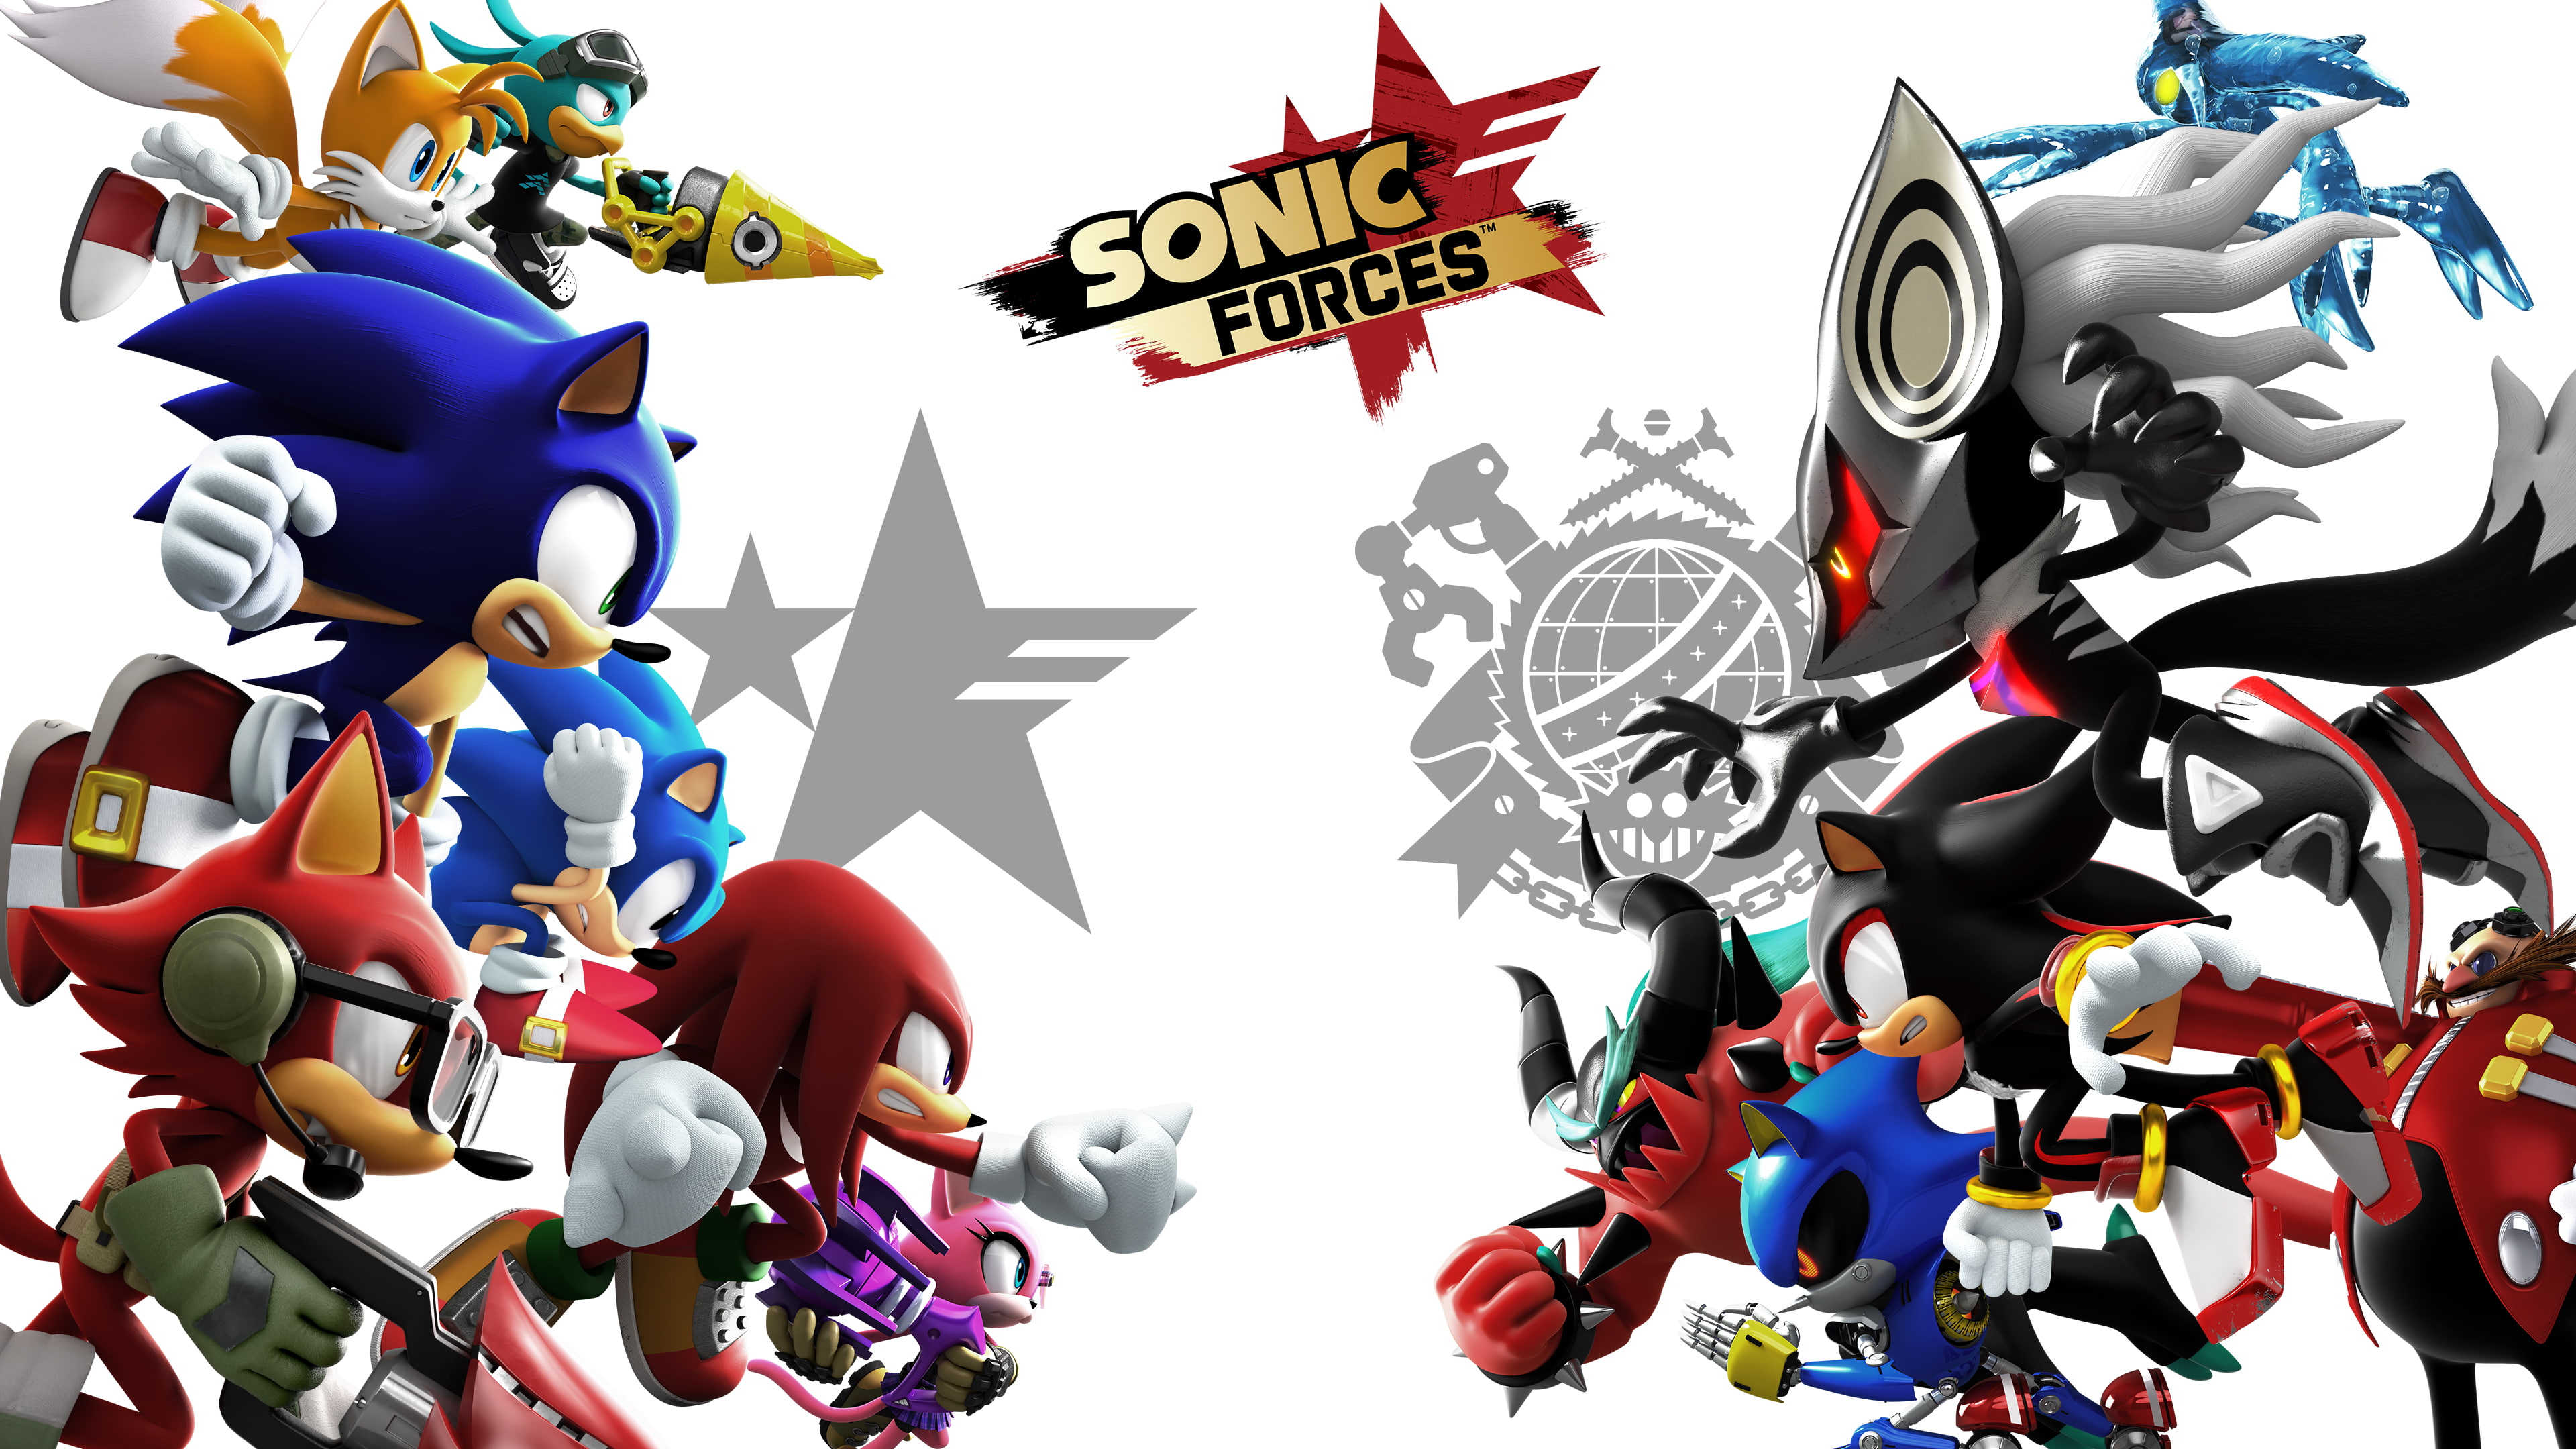 Sonic, Sonic Forces, Chaos (Sonic The Hedgehog), Doctor Eggman